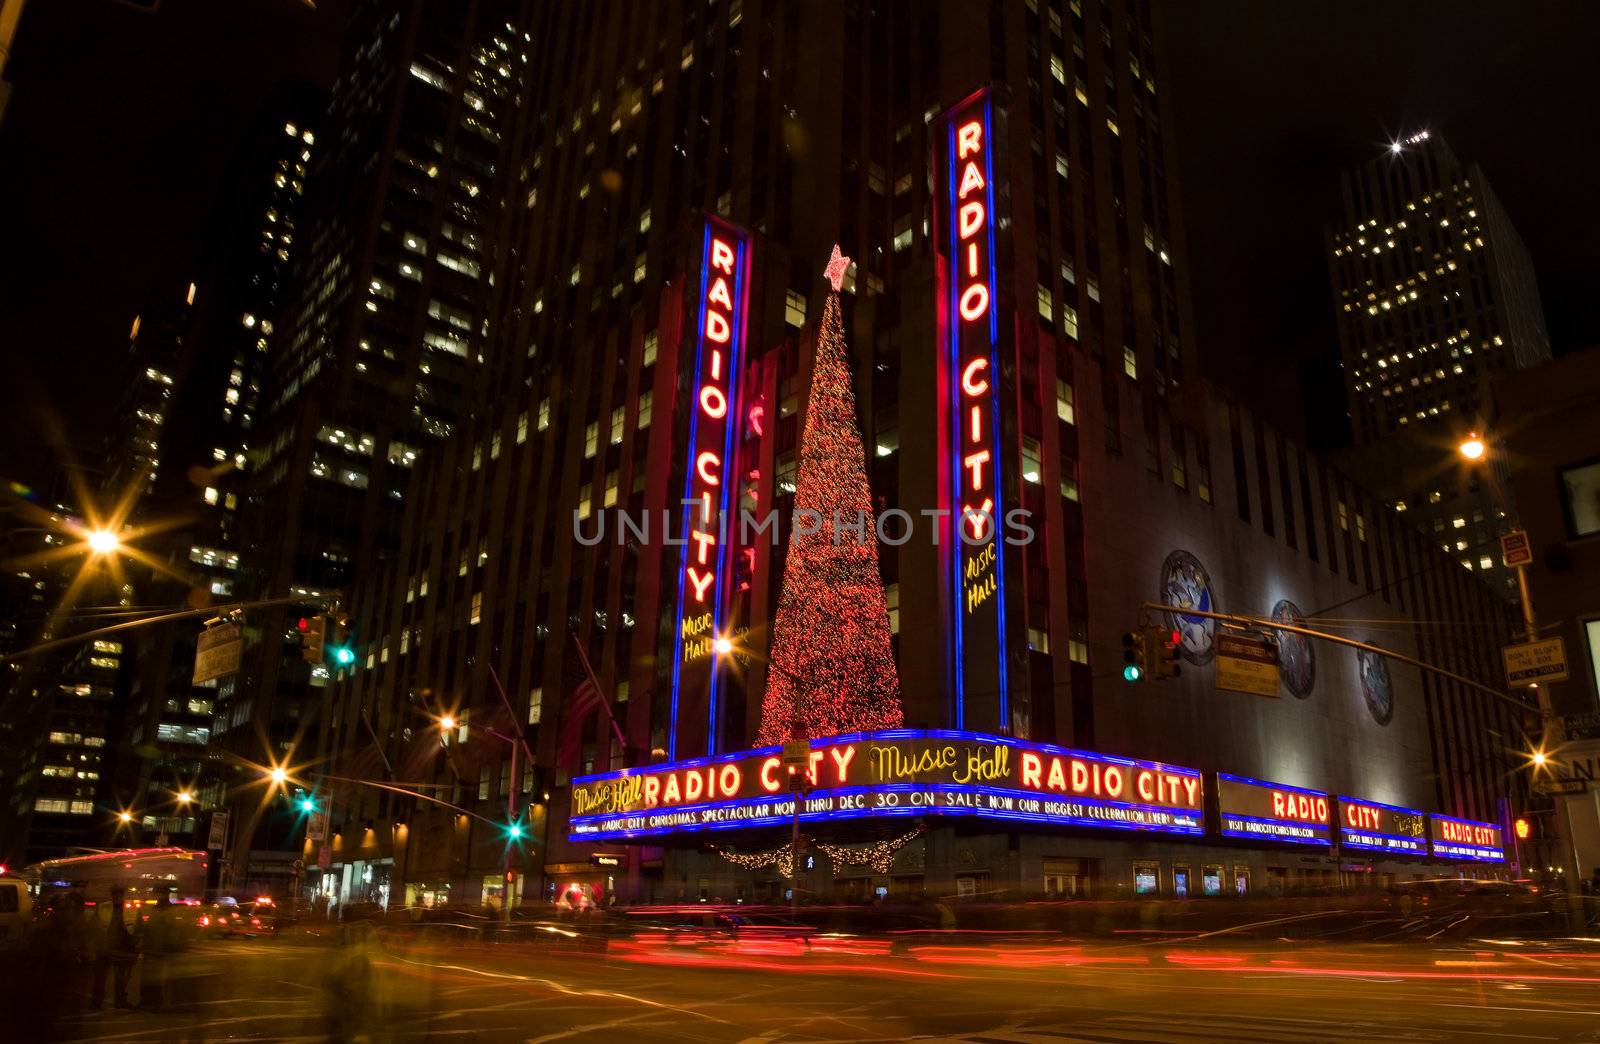 Radio City Music Hall and NBC studios at the Rockefeller Center in New York City by night